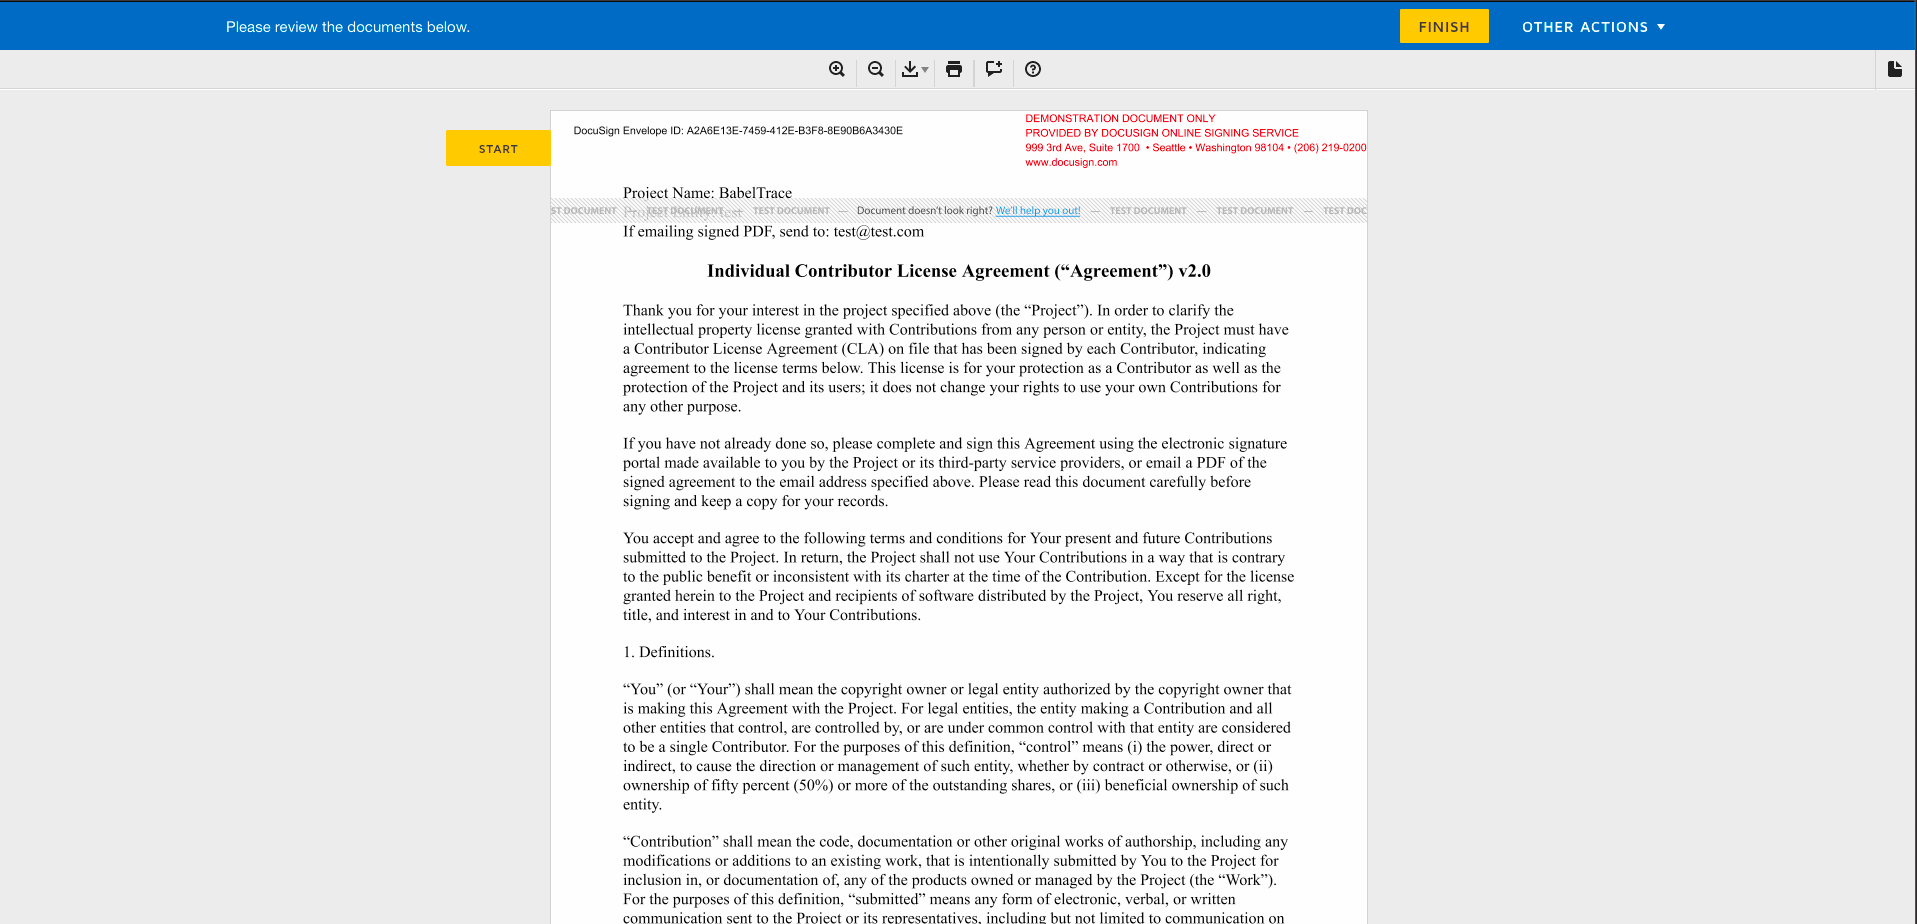 Docusign View 1